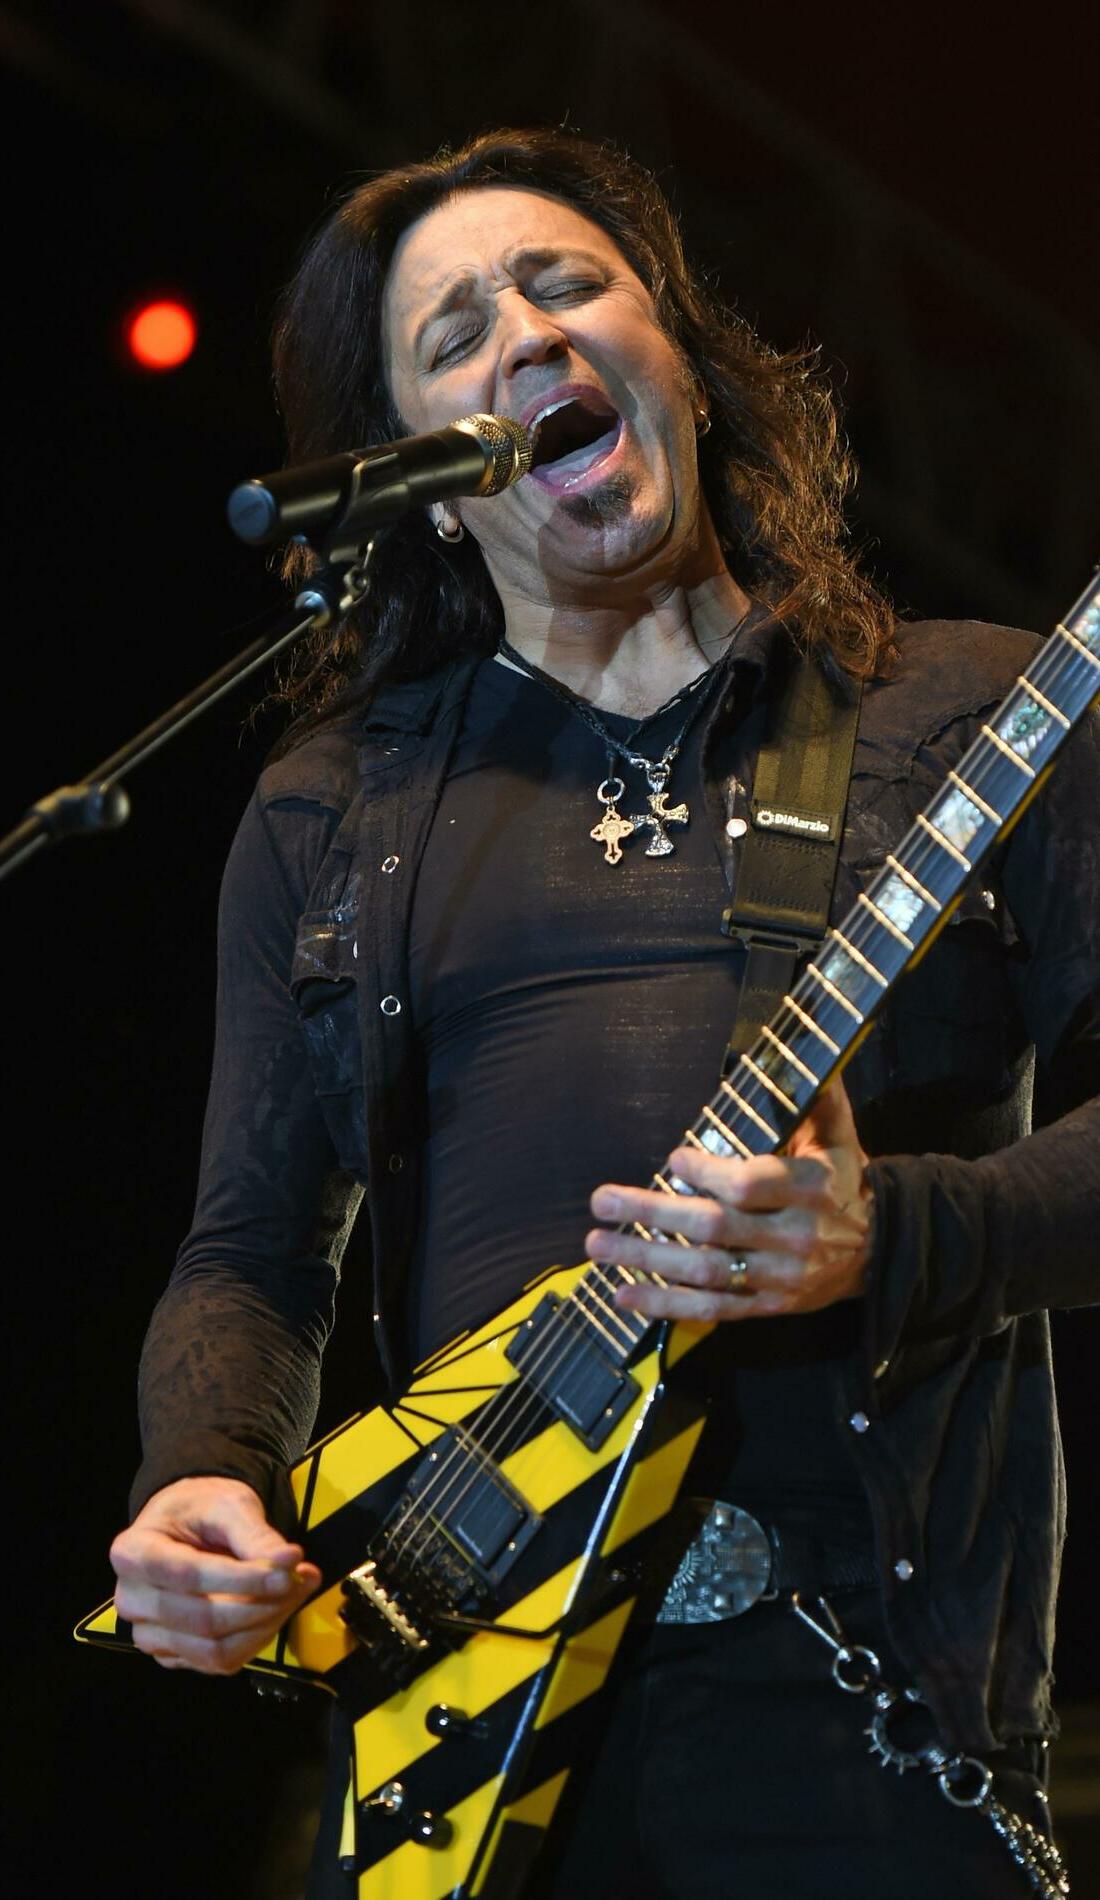 A Stryper live event